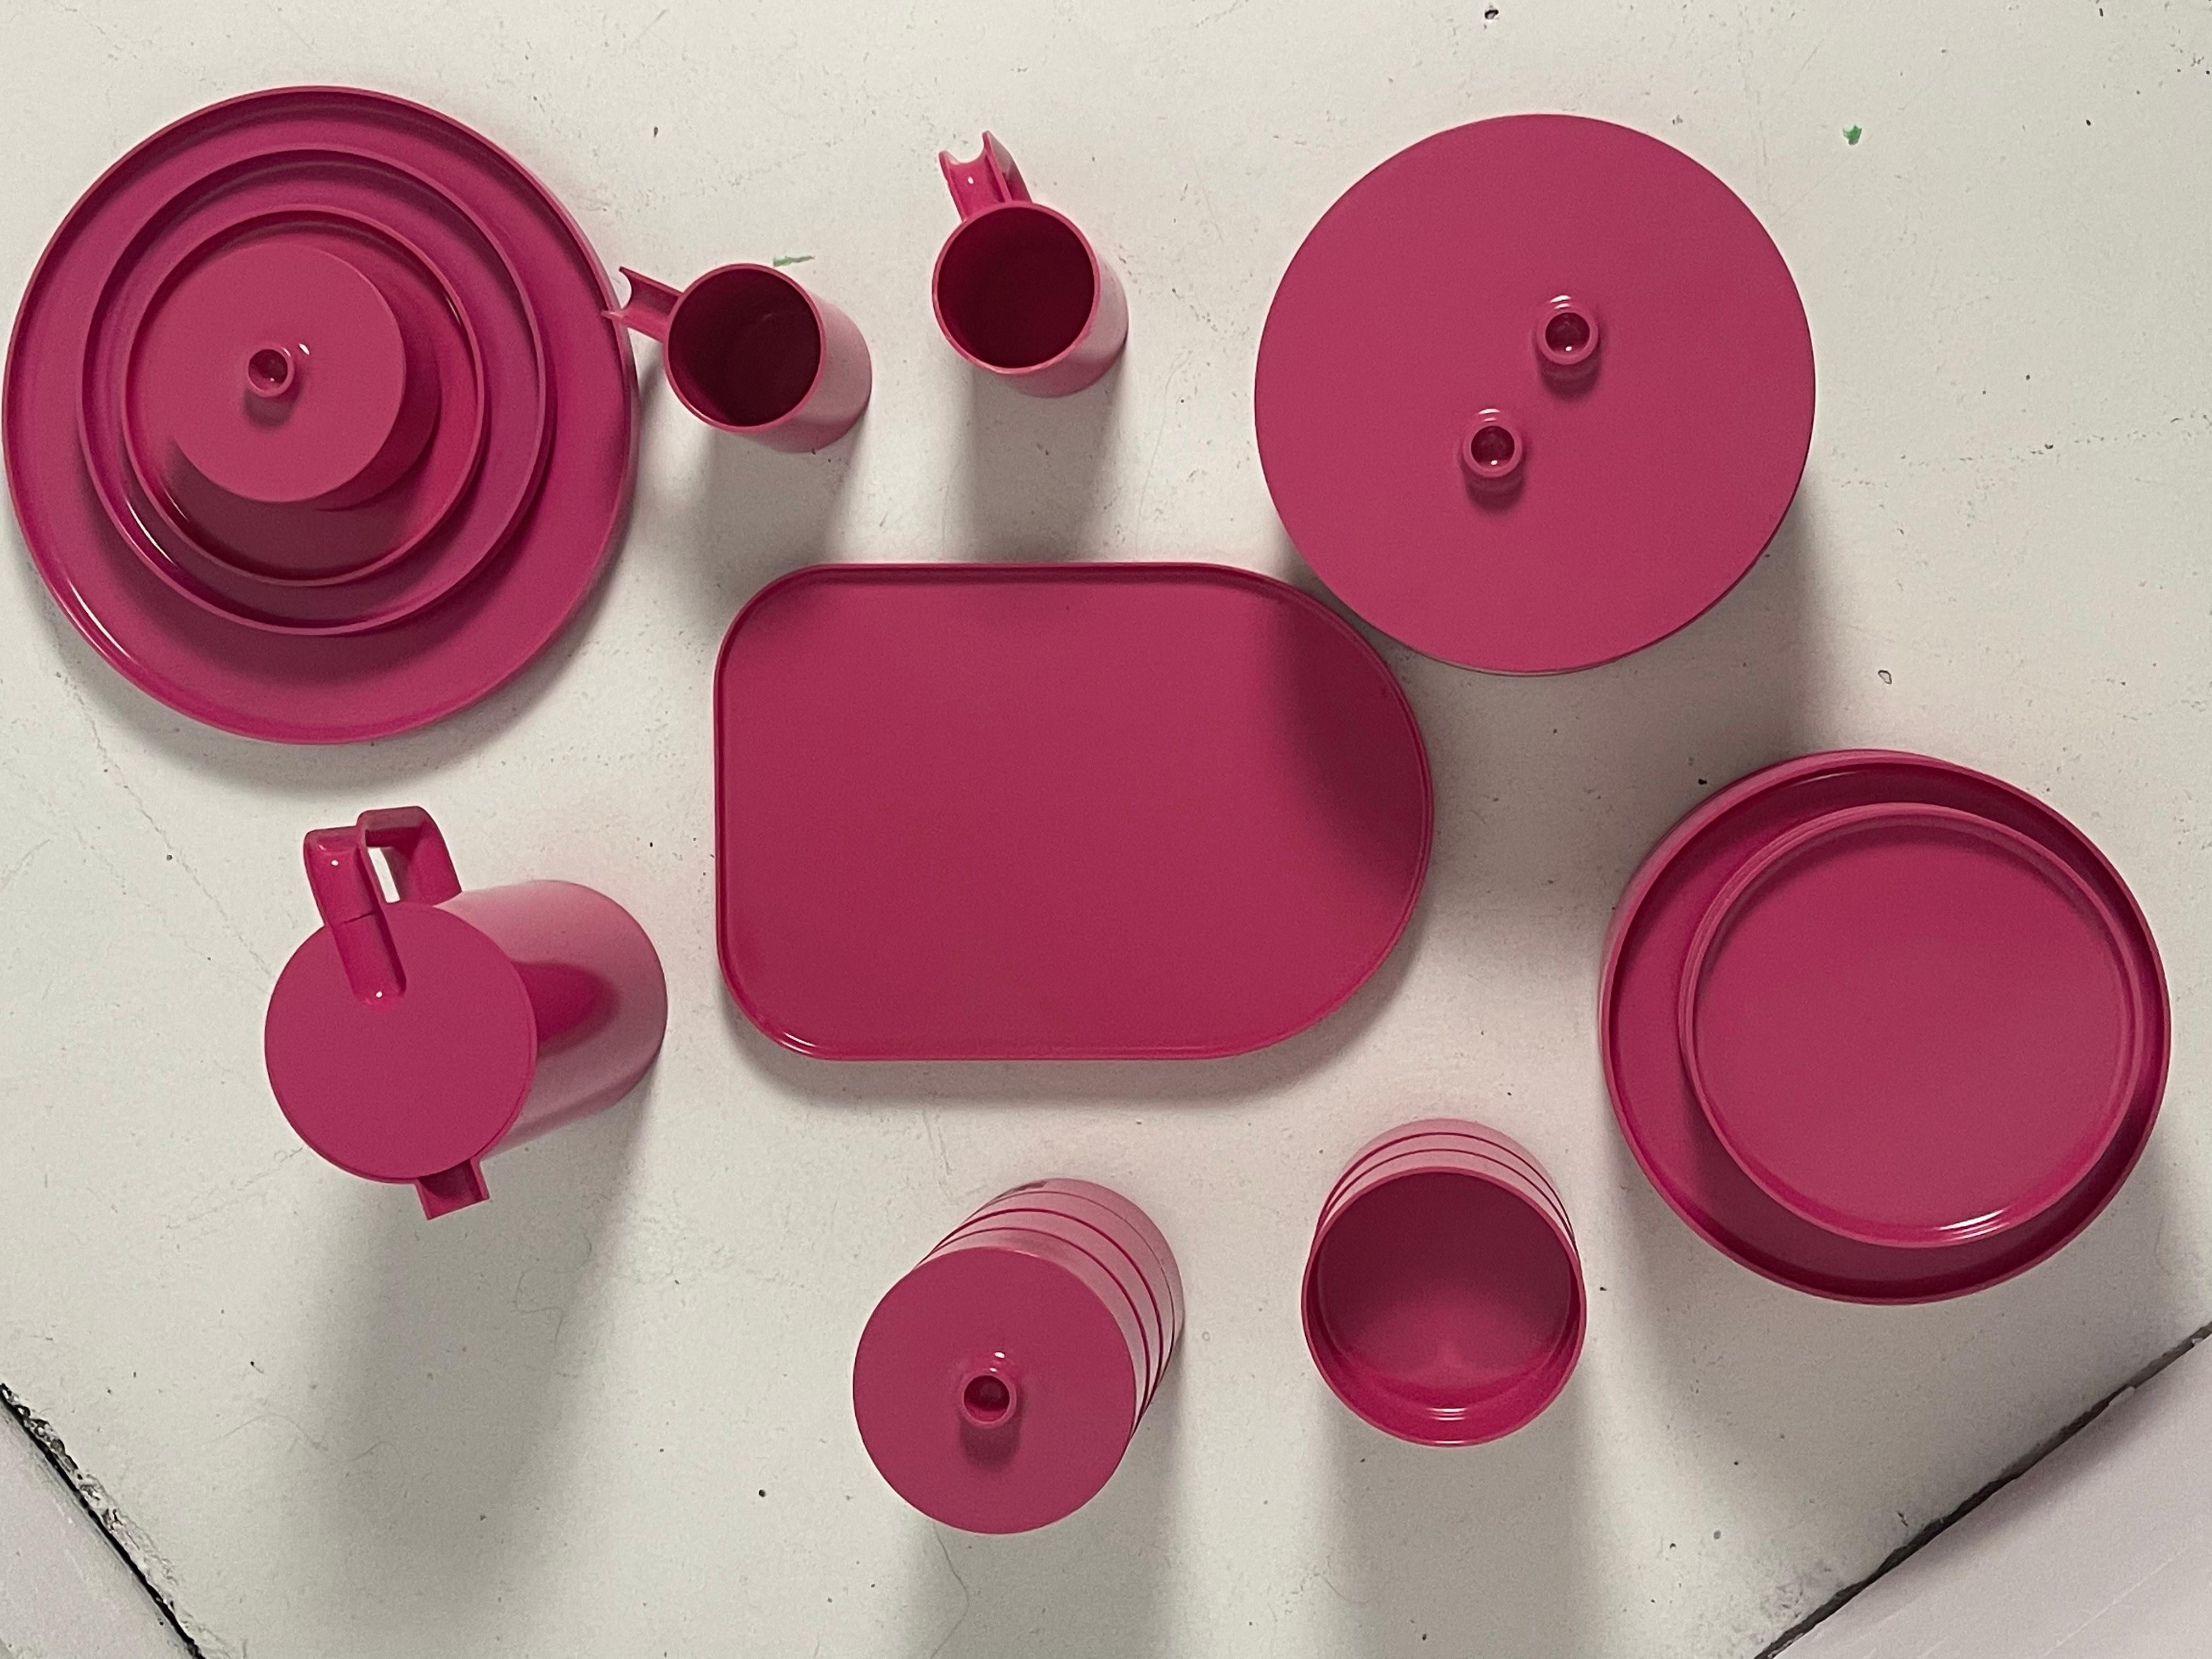 31 piece stackable dining set by Massimo Vignelli for Heller, 1964. Innovative and versatile design in a  rare and vibrant pink plastic. Purple set also available.